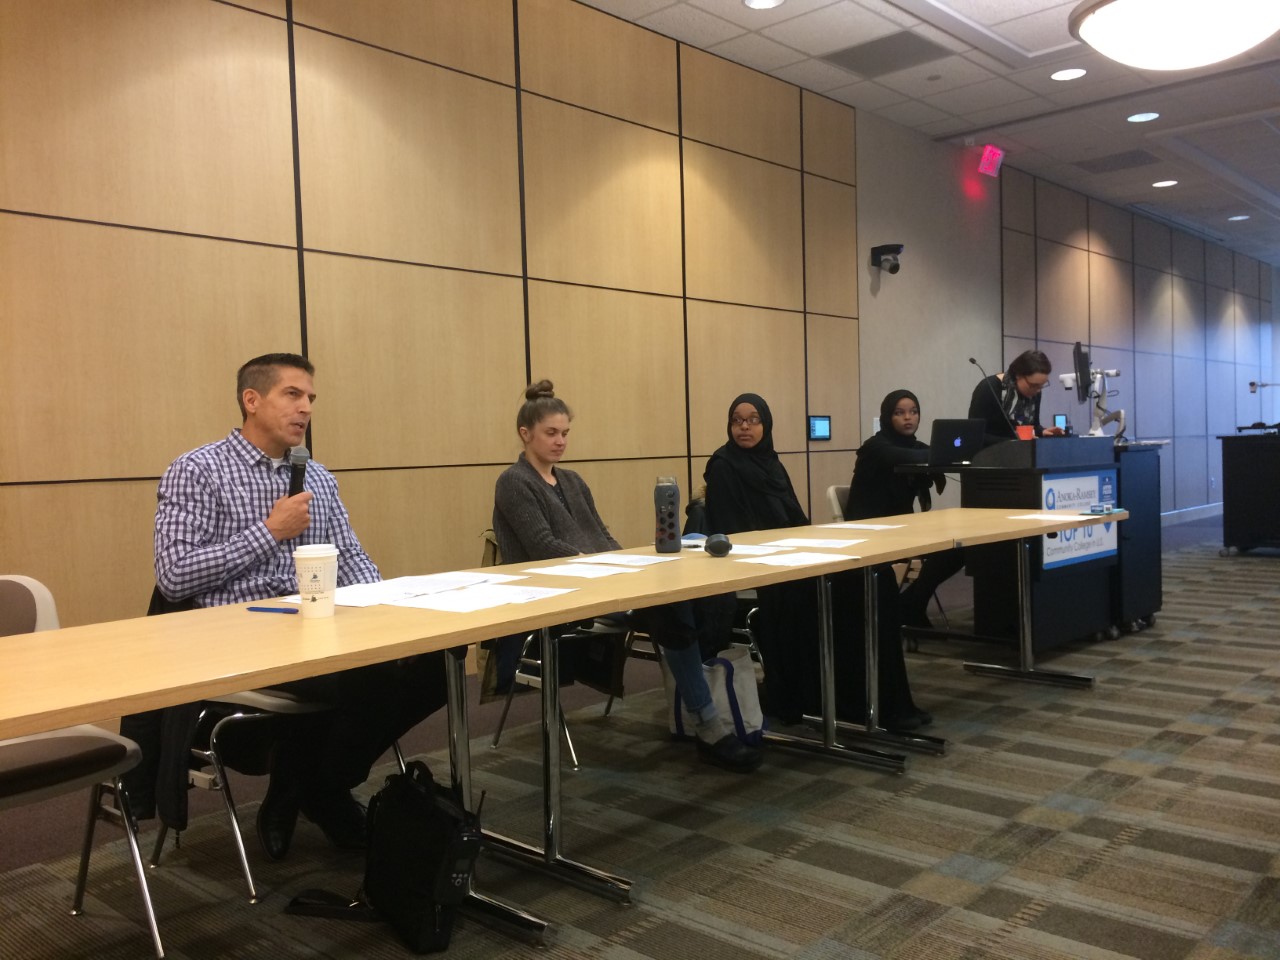 Police Chief Wise responding to a question asked by an audience member. Pictured left to right: Chief of Police Brad Wise, Dr. Kathleen Cole, Twin Cities student Sumaya Abshir, ARCC student Sumeyo Hussein, moderator Melody Hoffmann. Photo credit to Michelle Belmont.